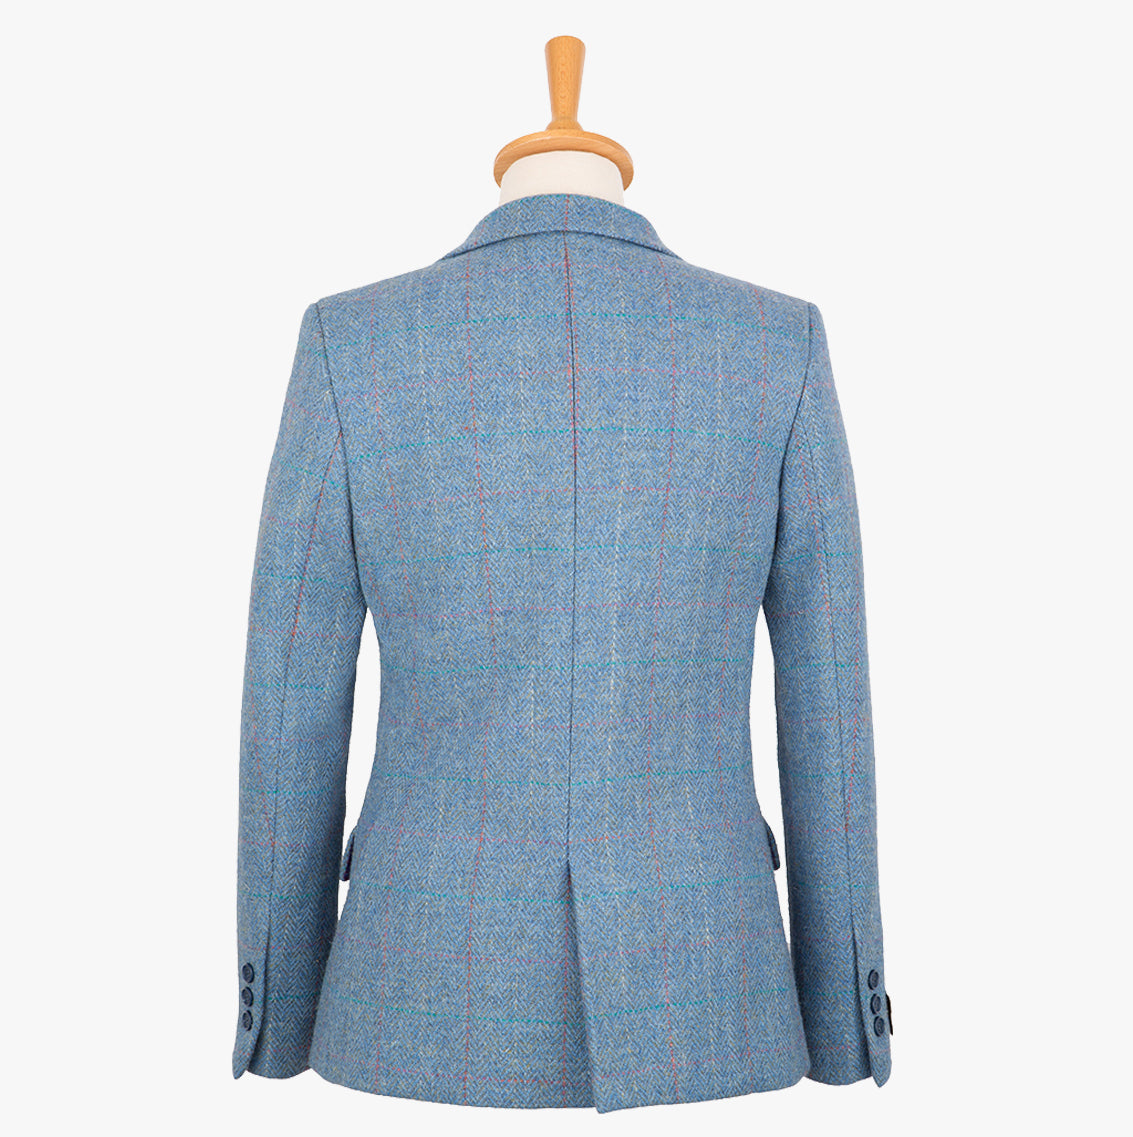 Rear view of our Harris Tweed ladies jacket insky blue, the colour is sky blue with a white, red and subtle turquoise overcheck.. It has a neat back with a smal single vent.